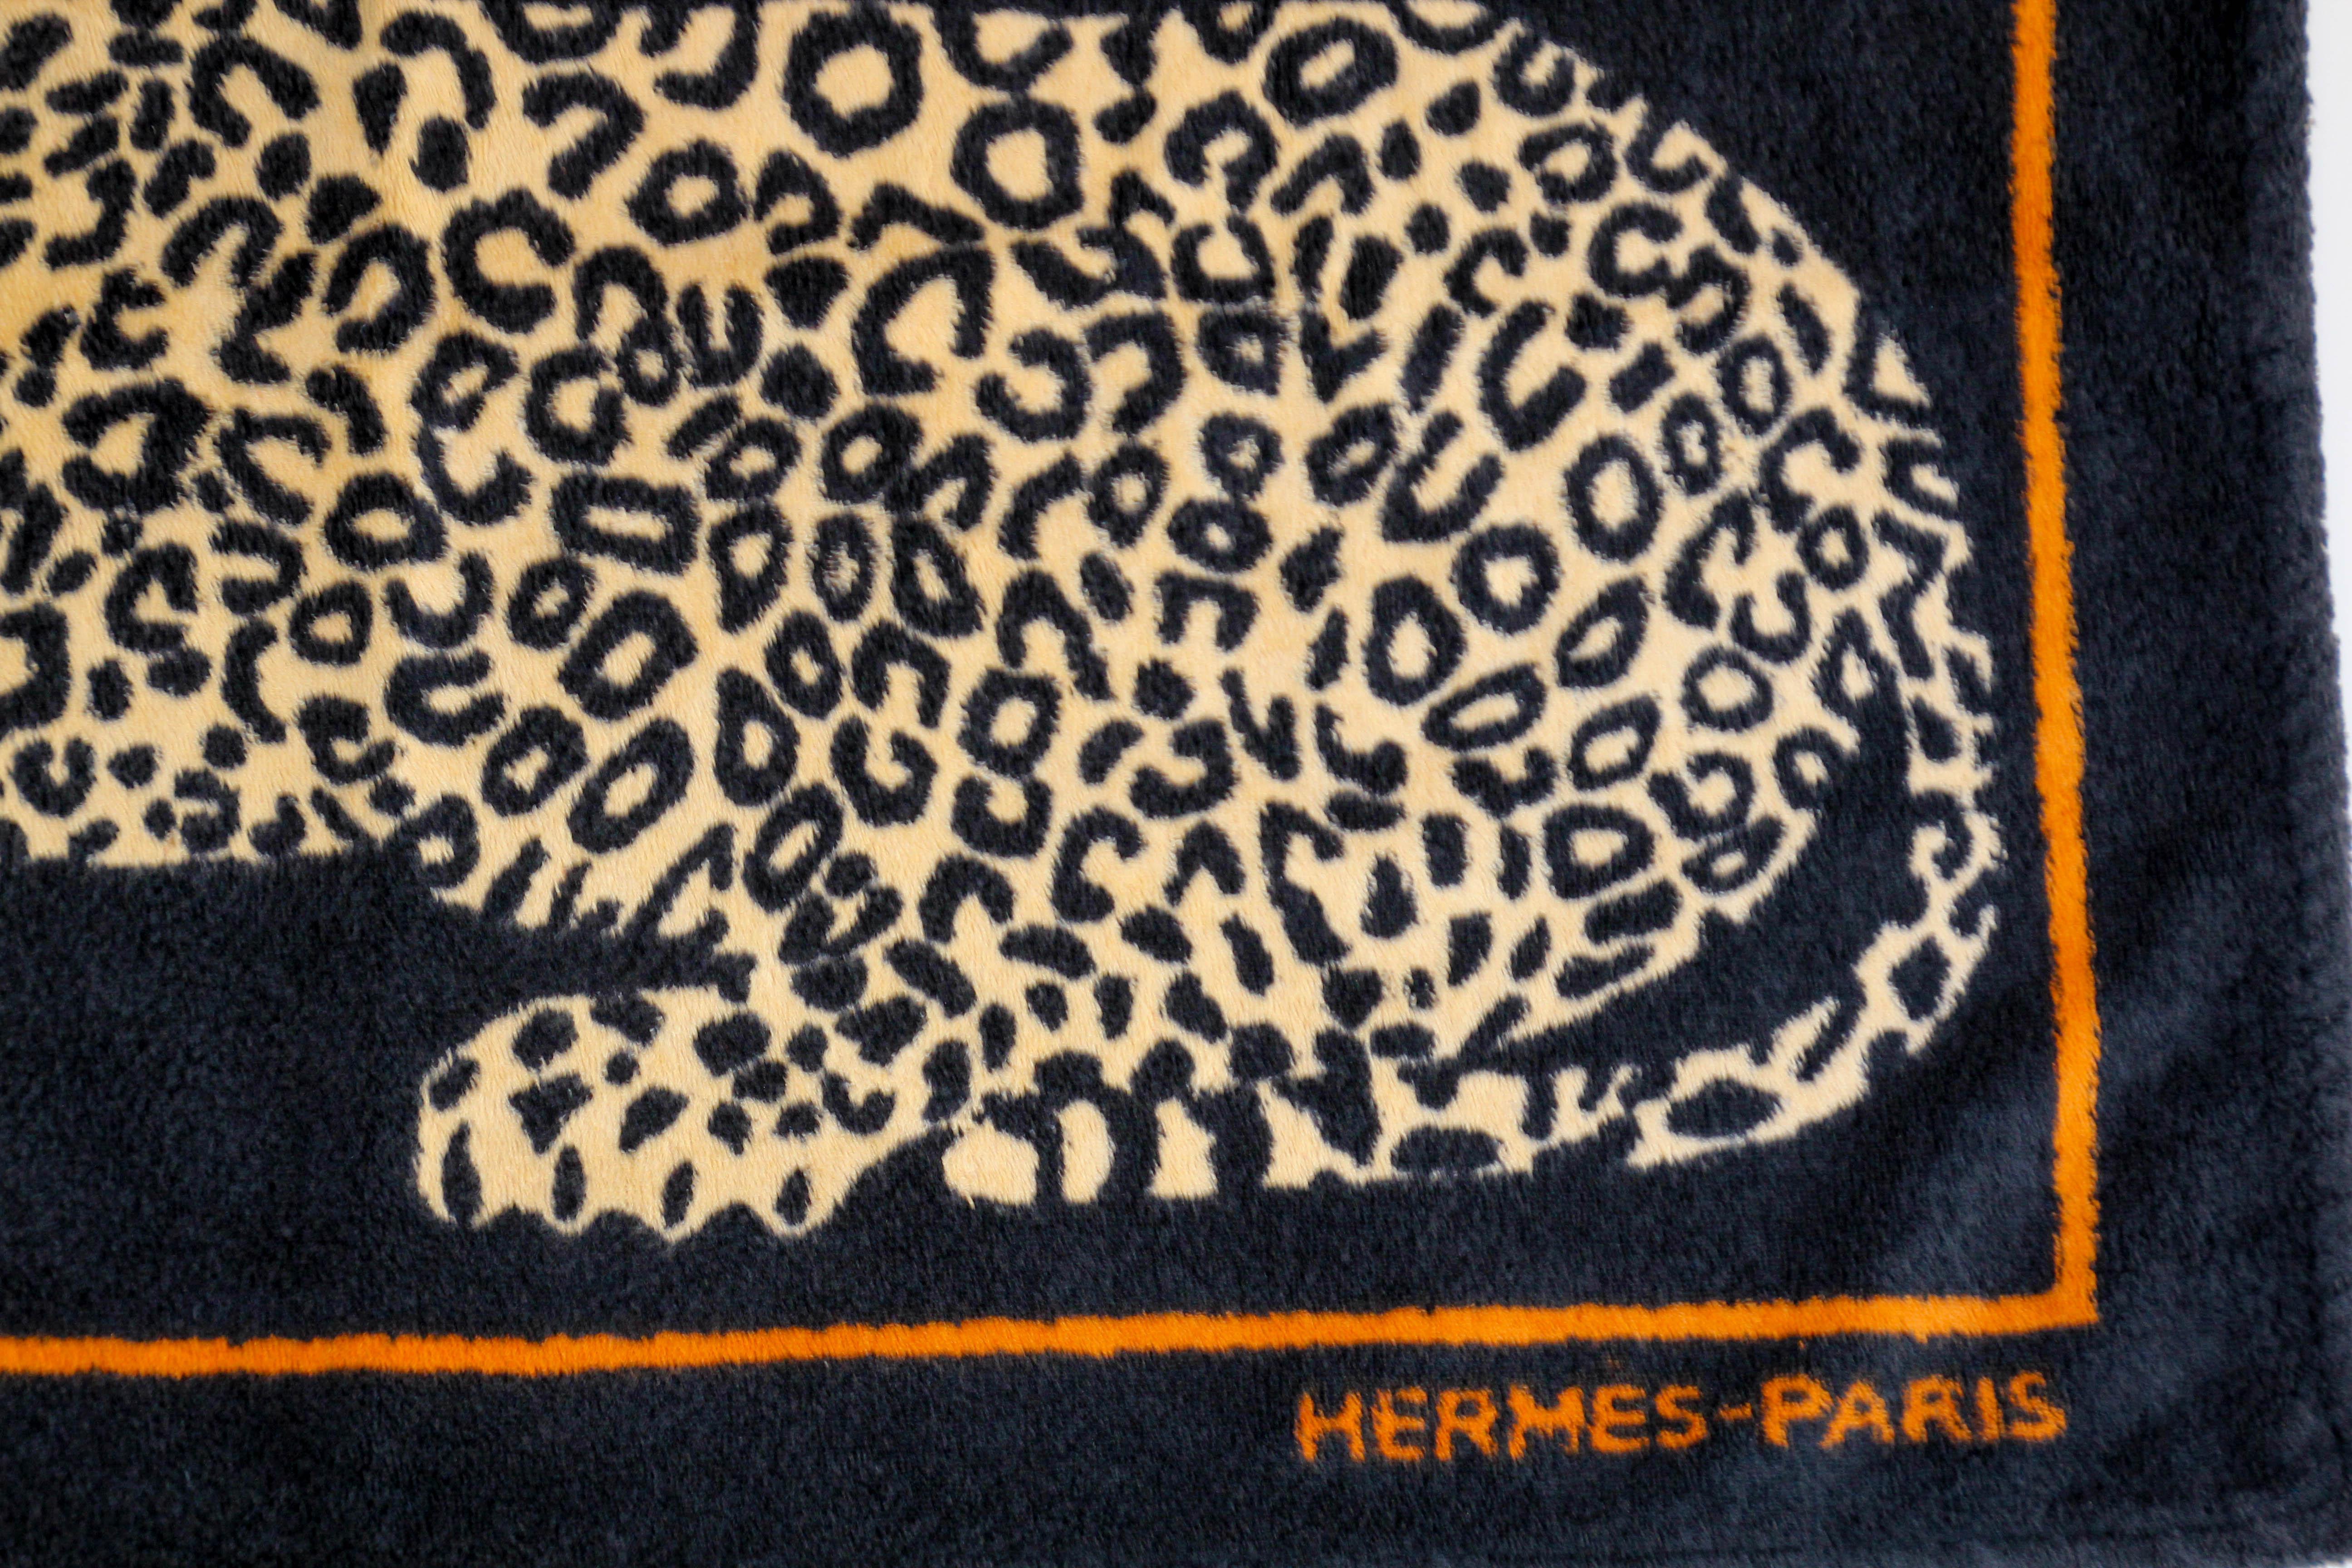 Women's or Men's Hermes Paris Small Bath Mat with a Leopard Print in Black and Orange